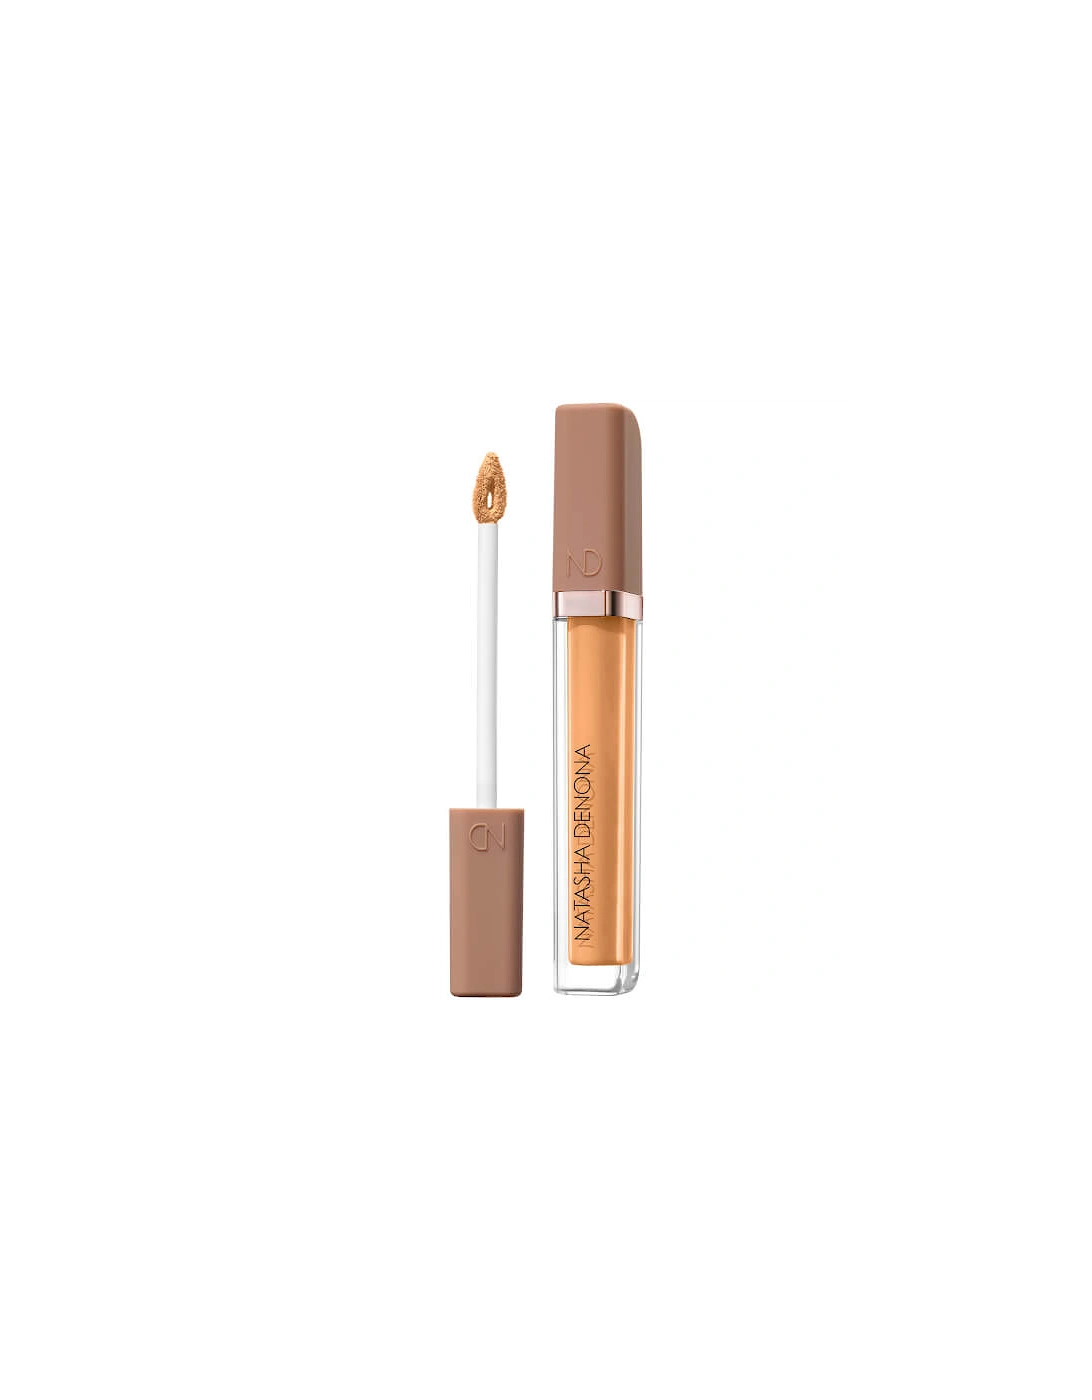 Hy-Glam Concealer - P5, 2 of 1